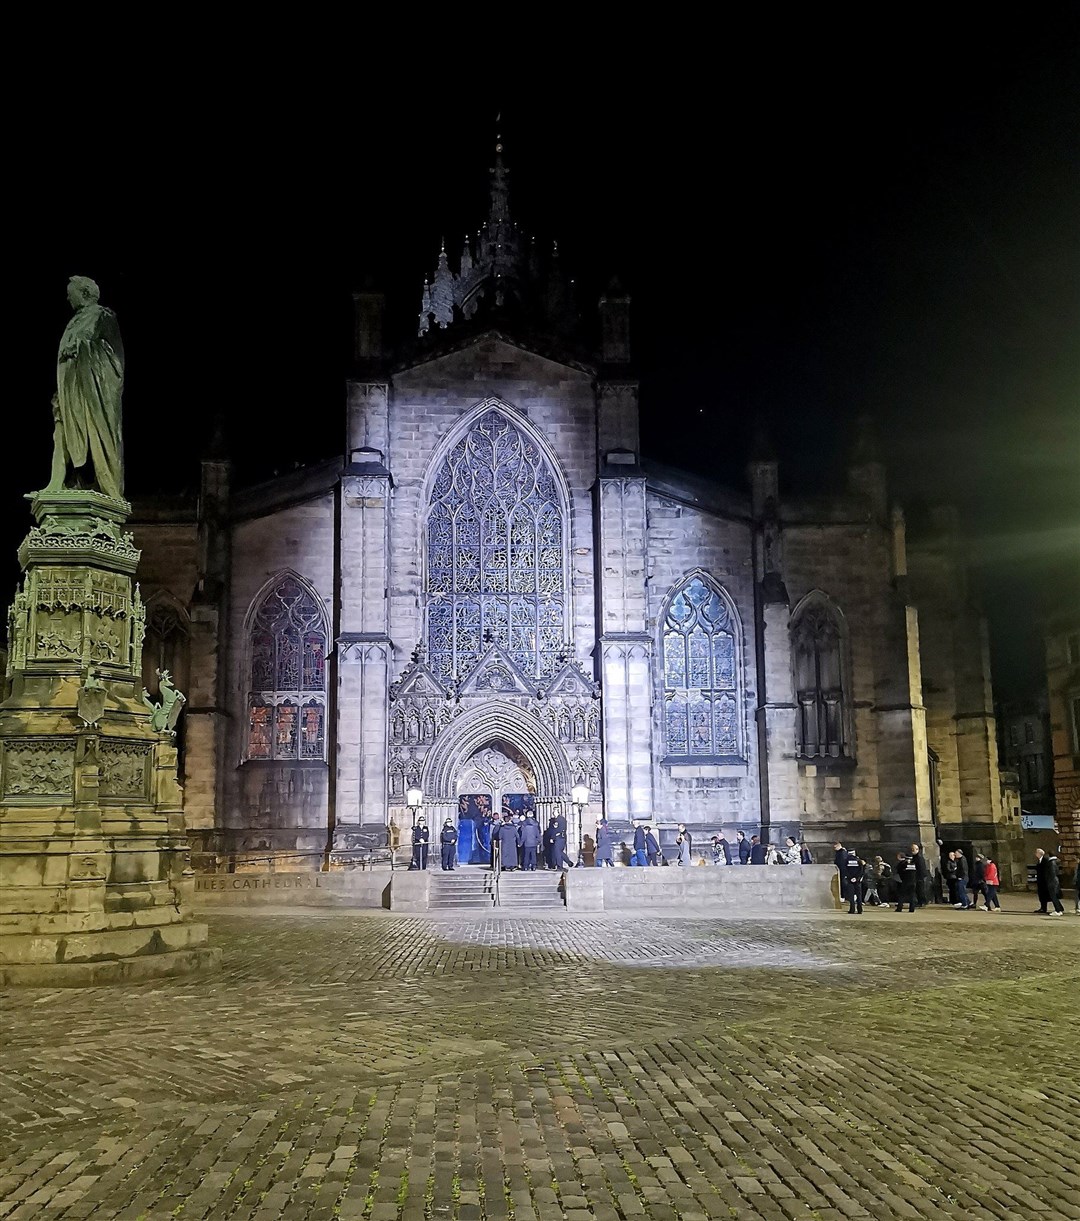 People filed into St Giles’ Cathedral throughout the night to pay their respects to the Queen (Mitch Stevenson/PA)